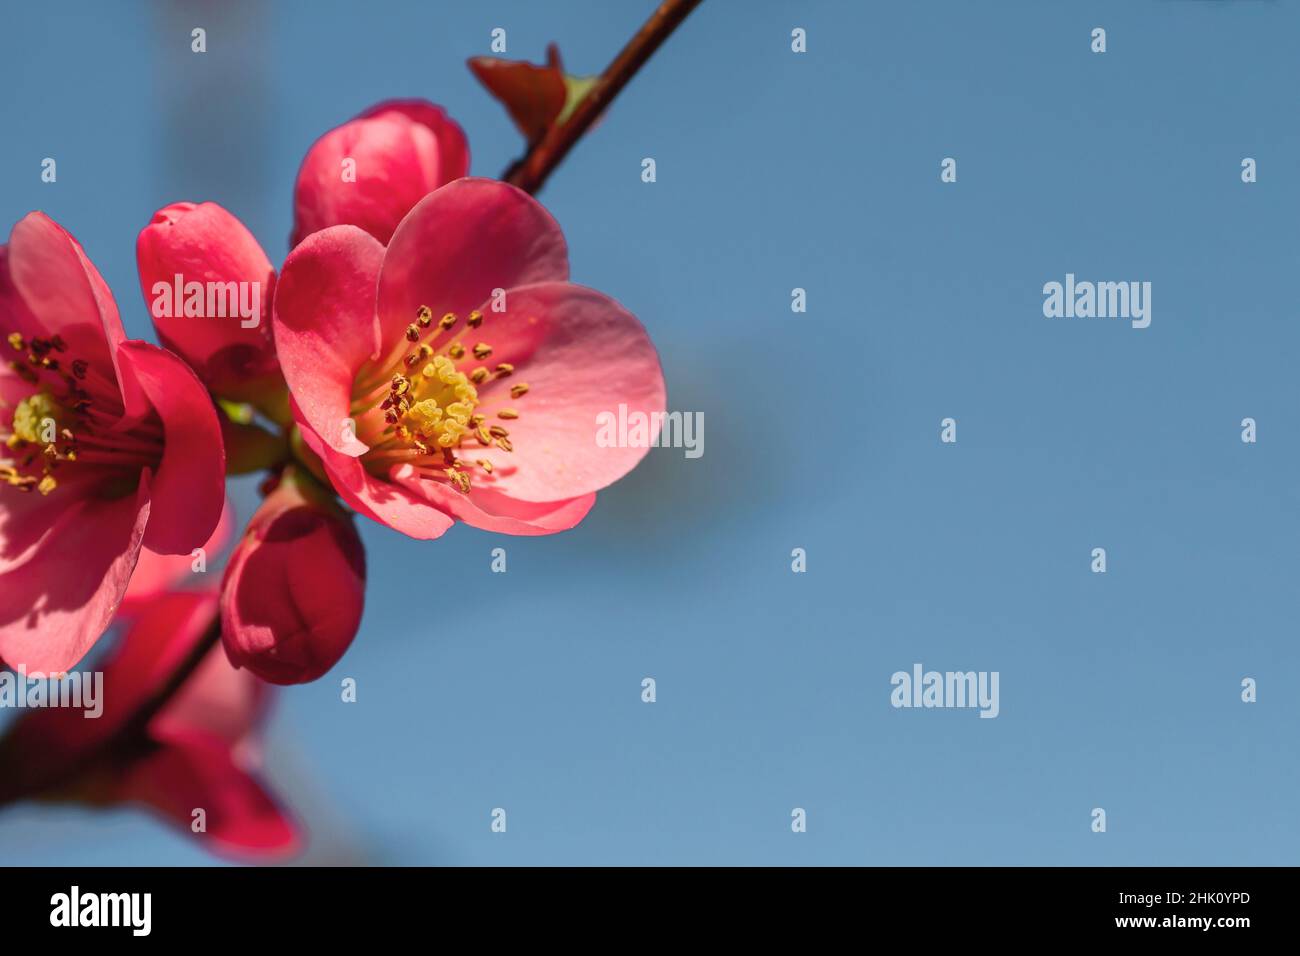 Detail of blossoming Maule's quince (Chaenomeles Japonica) deep pink colored flowers Stock Photo